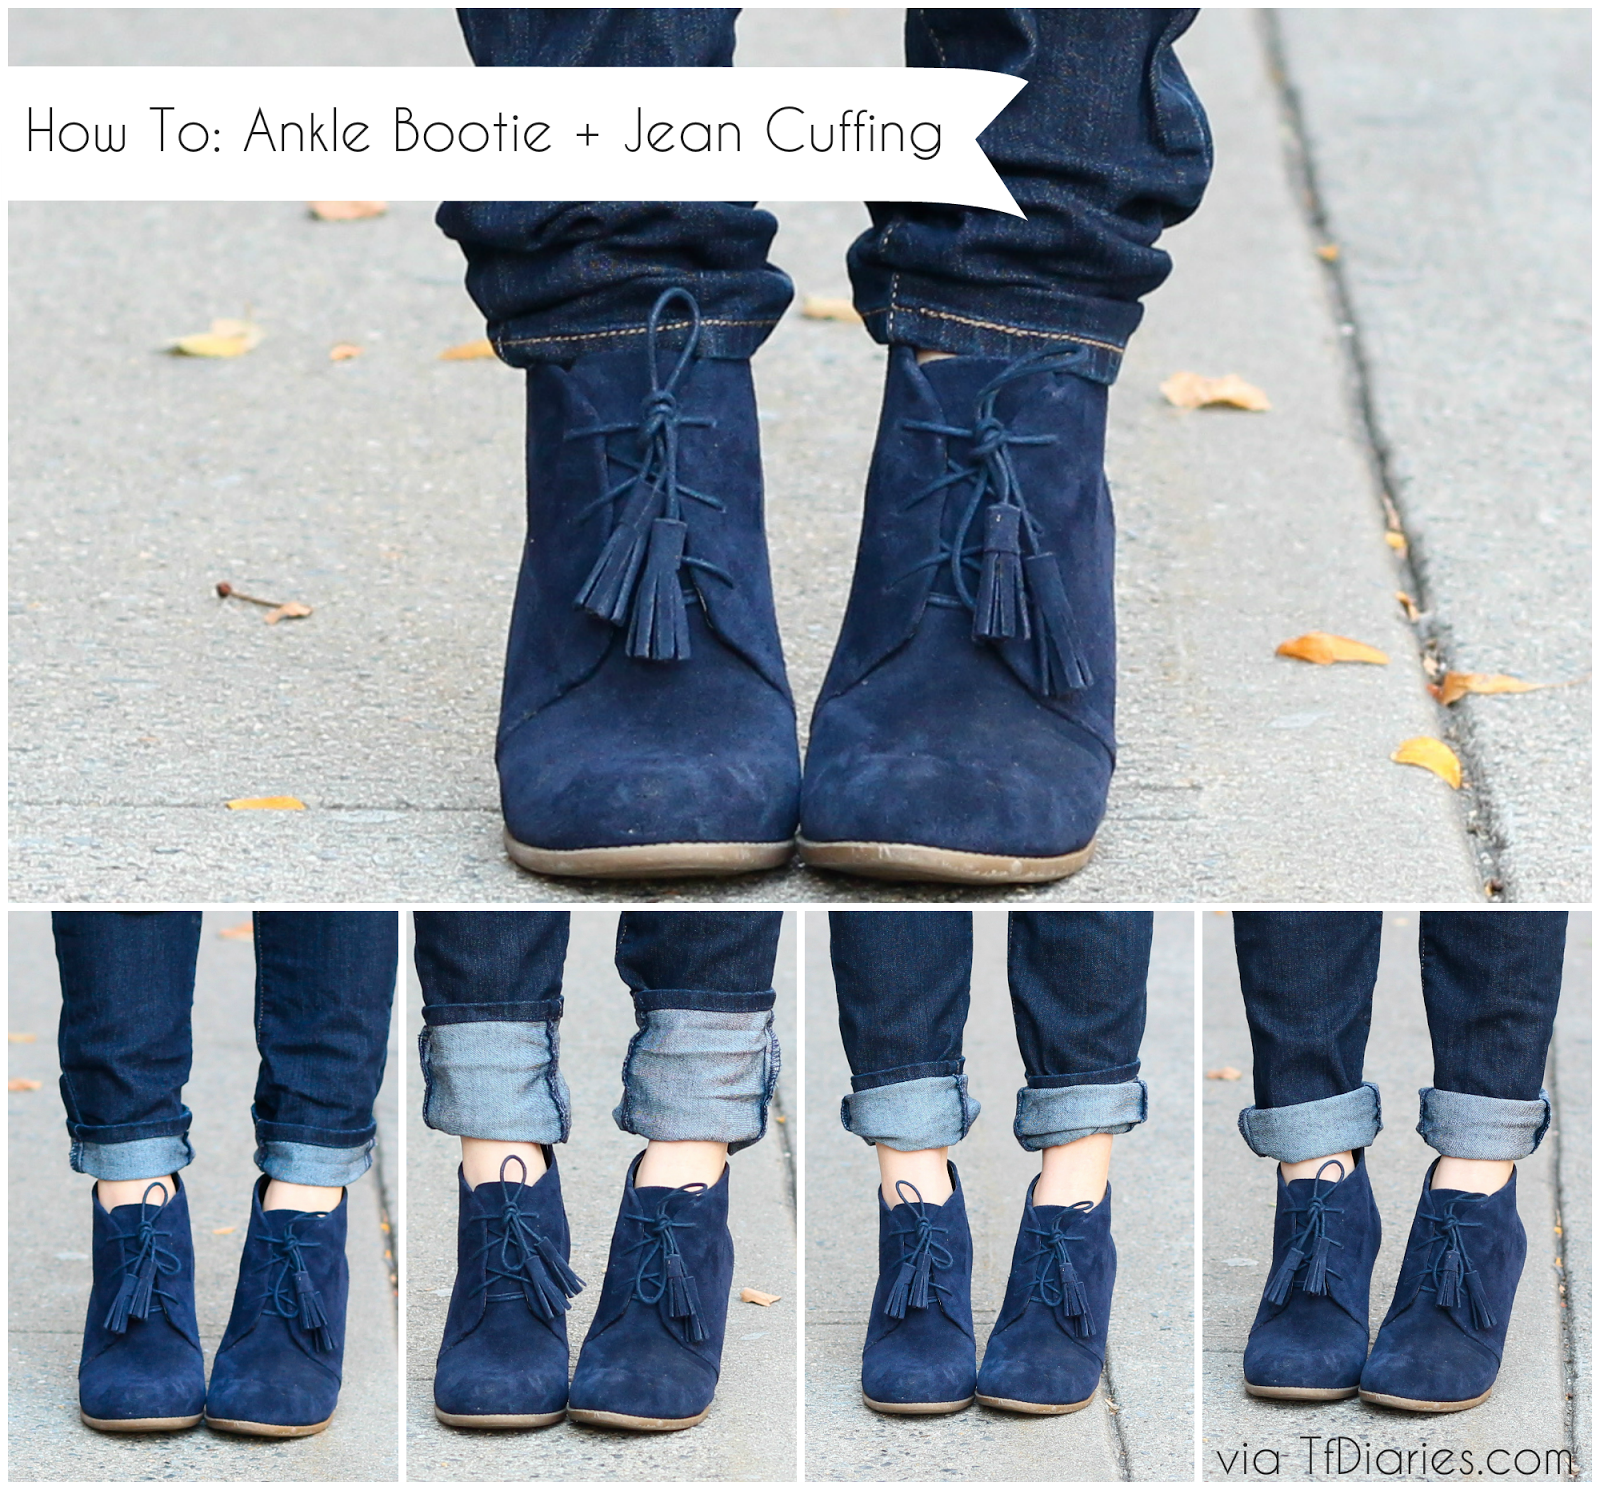 jeans with bootie style, fall style, fall trends, how to wear cuff jeans, tfdiaries, megan zietz